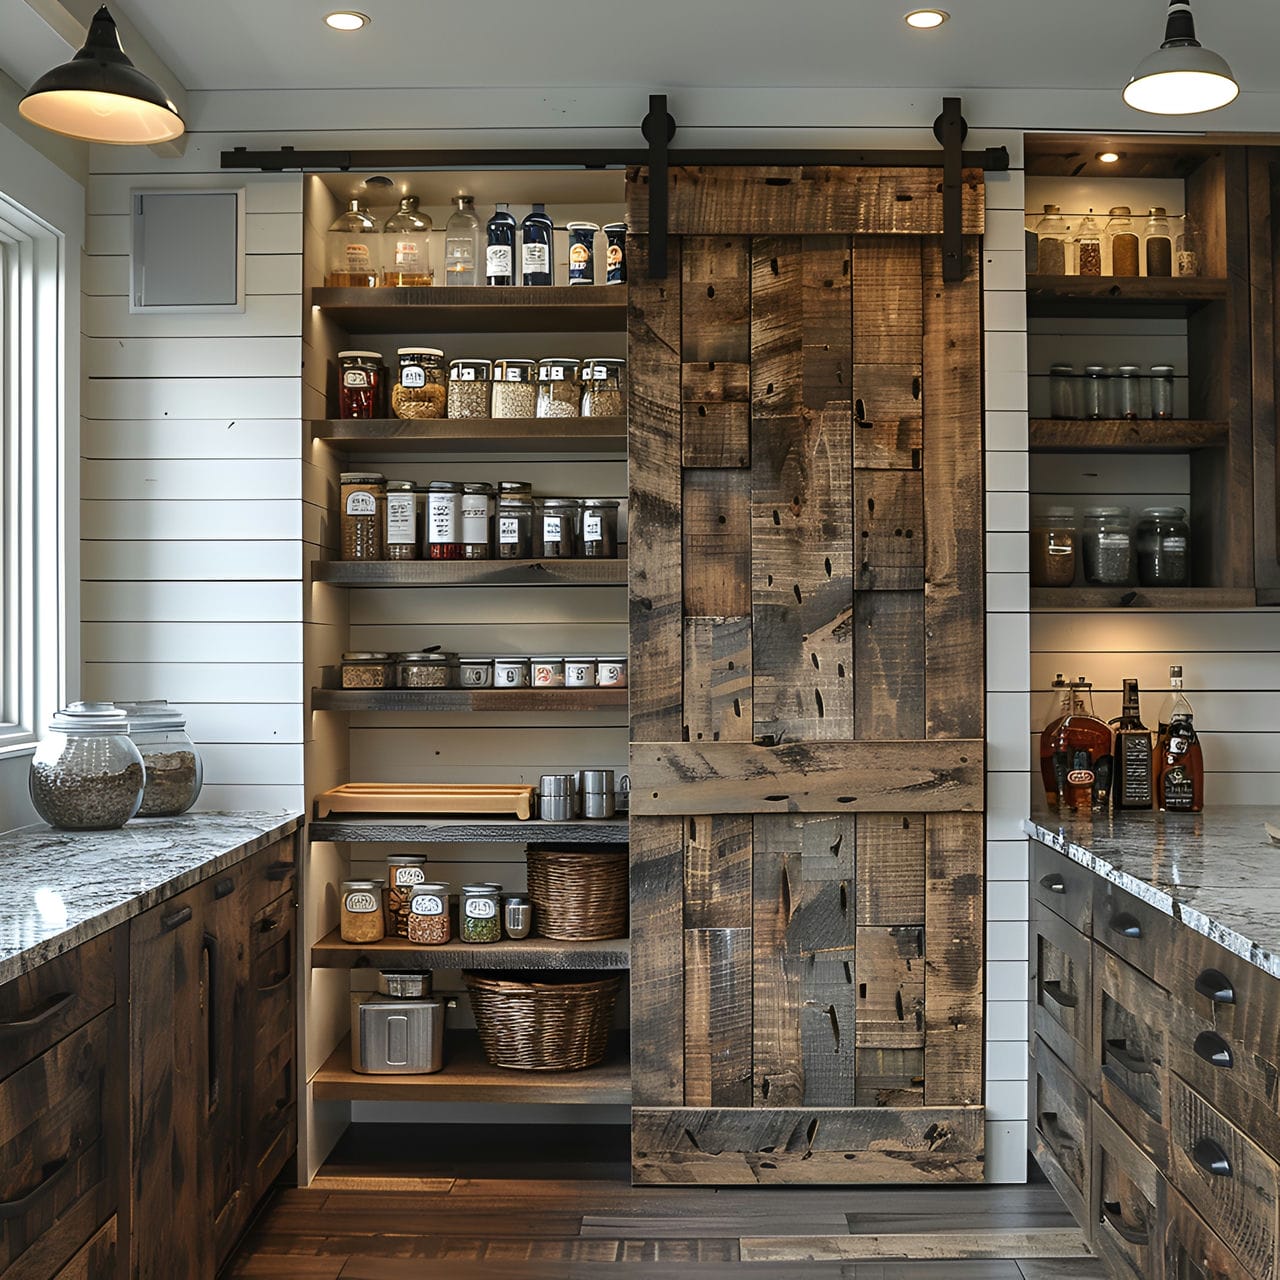 Pantry: size, functionality, uses, furniture and renovation